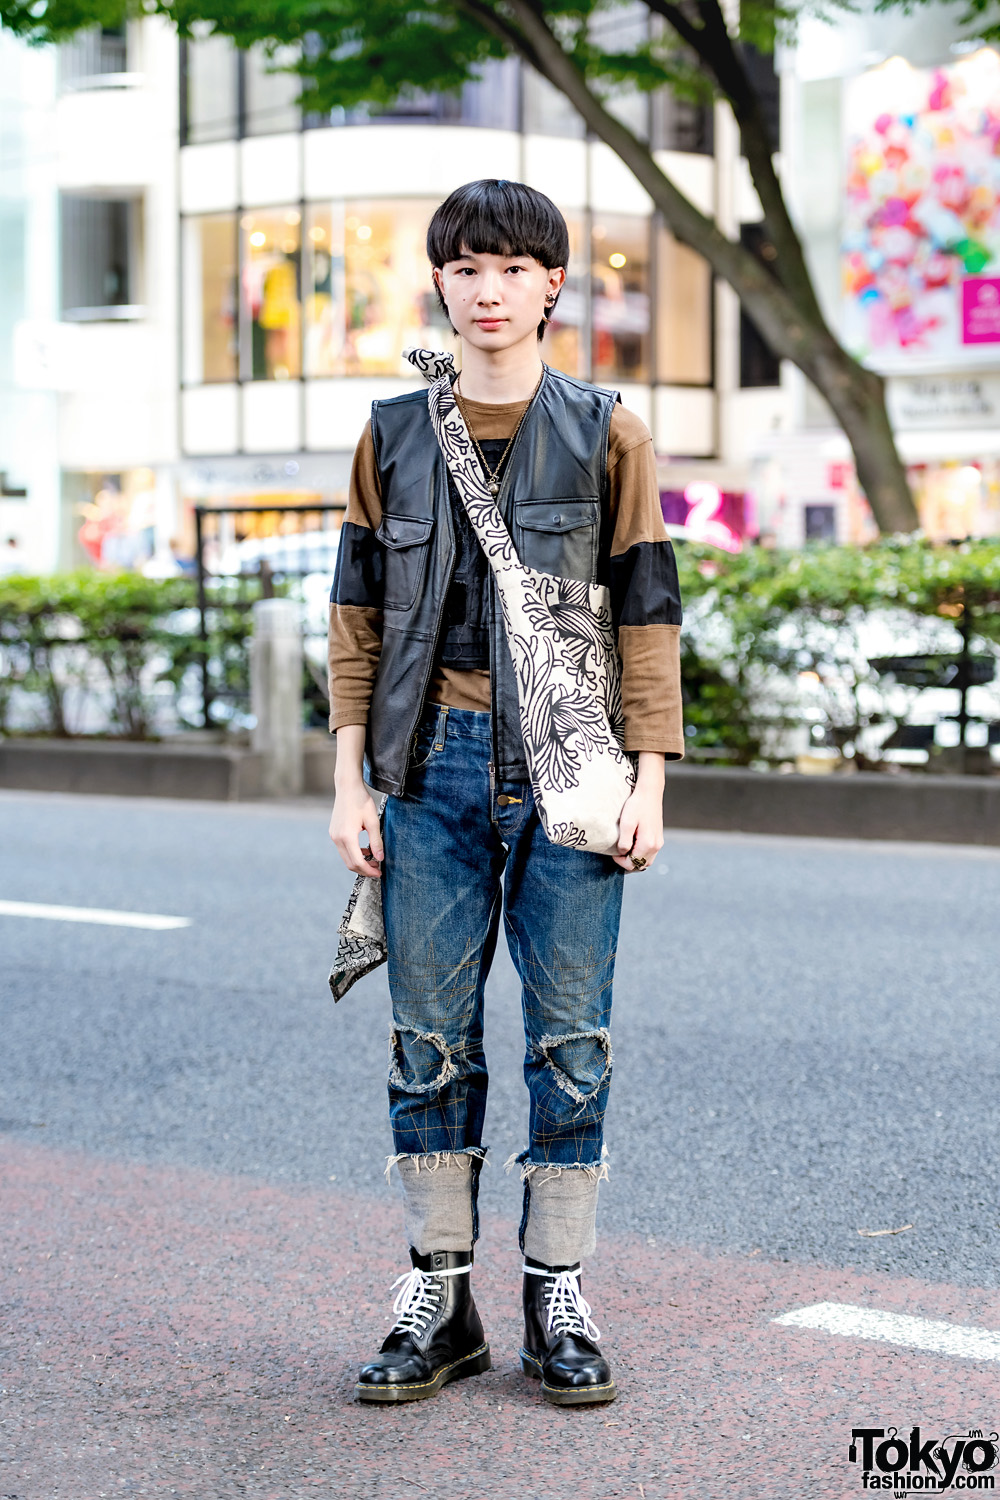 Japanese Streetwear Fashion w/ Leather Vest, Christopher Nemeth Distressed Denim, Rope Print Tote & Dr. Martens Boots